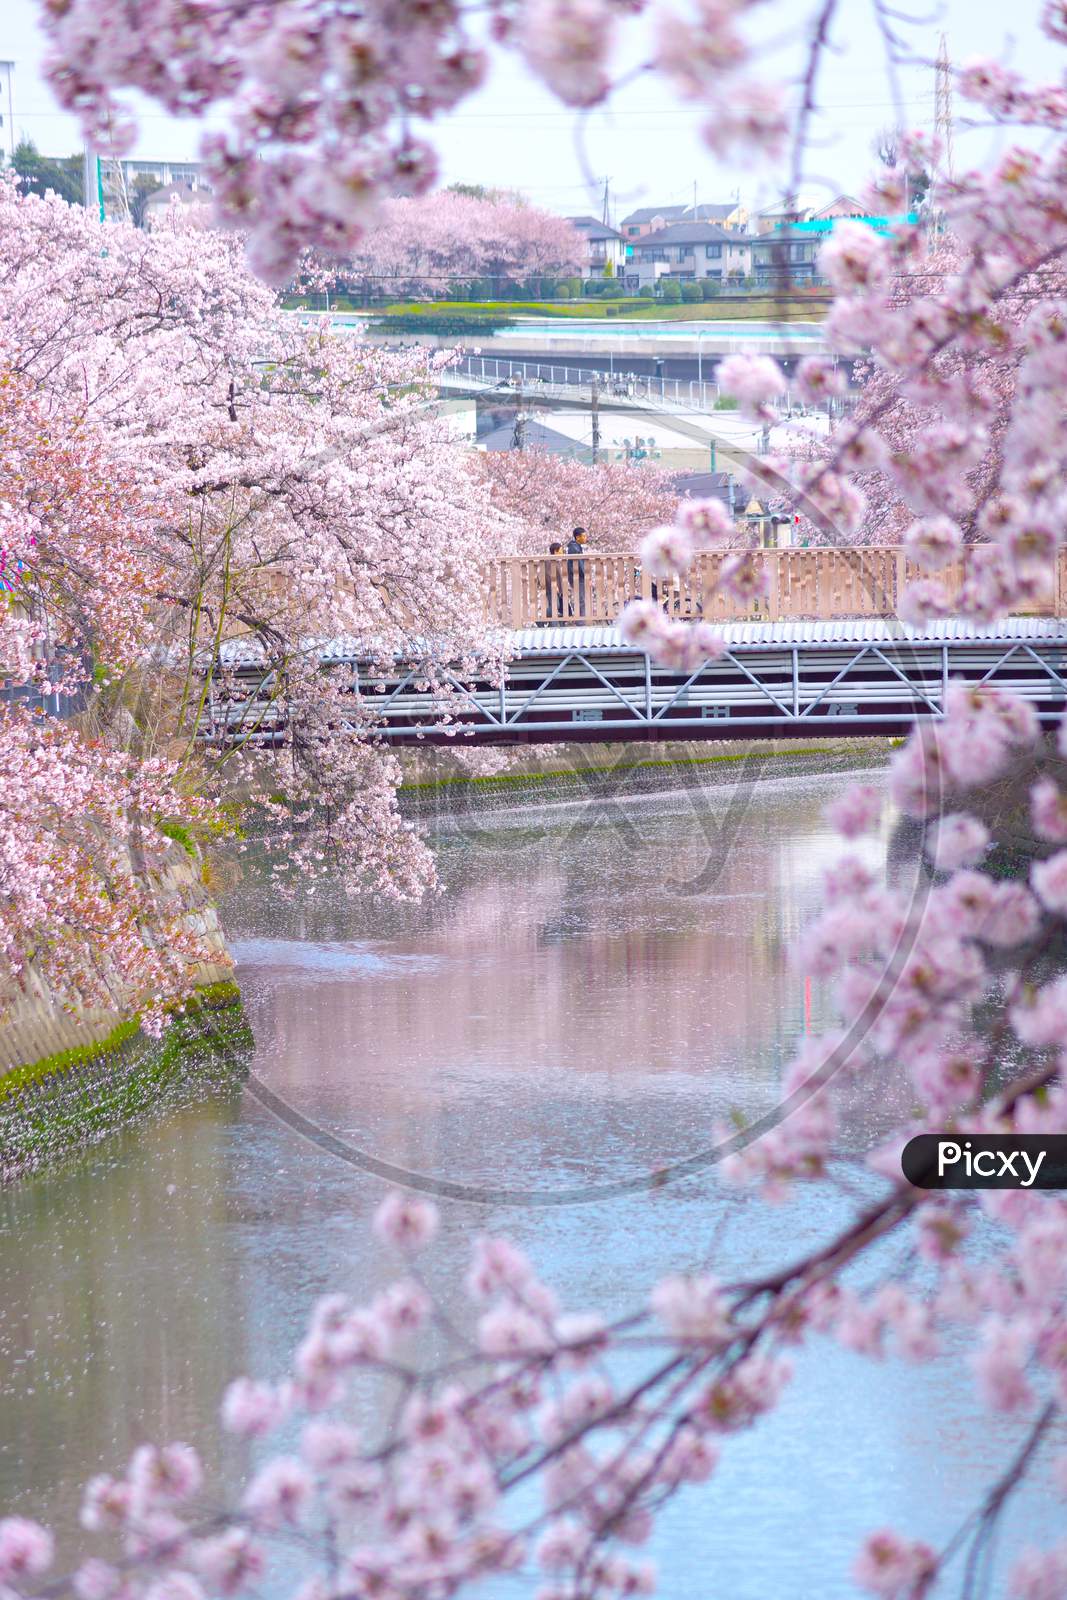 Ooka River Promenade Of Cherry Blossoms In Full Bloom